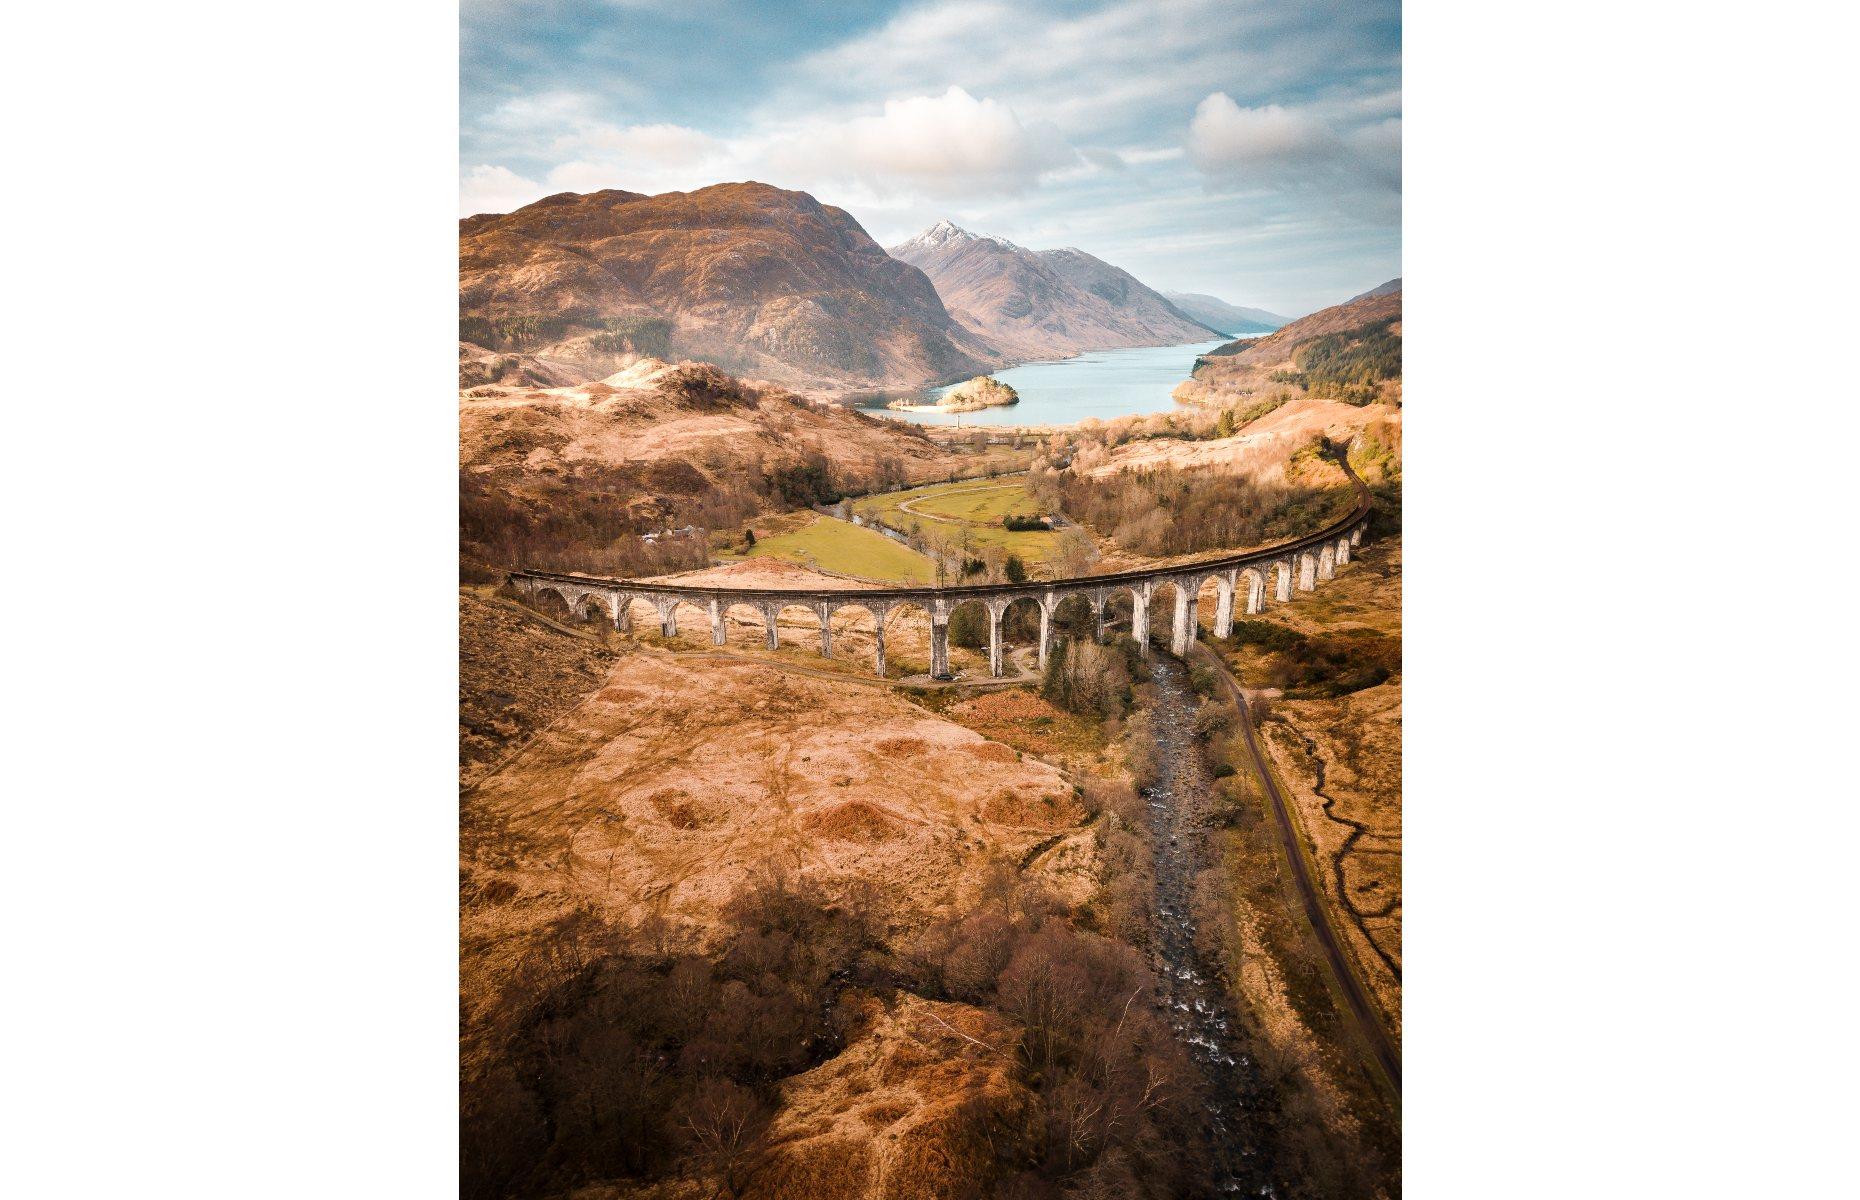 Famous for being the bridge which the Hogwarts Express crosses in the Harry Potter movies, Glenfinnan Viaduct was built in the 1890s and is the longest concrete rail bridge in Scotland, with a total of 21 huge arches. Today, the scenic spot is extremely popular with rail buffs, hikers and photographers alike. Dominic Reardon earned a spot on the shortlist in the World History category for this stunning image, which shows the viaduct in all its beauty in autumn.